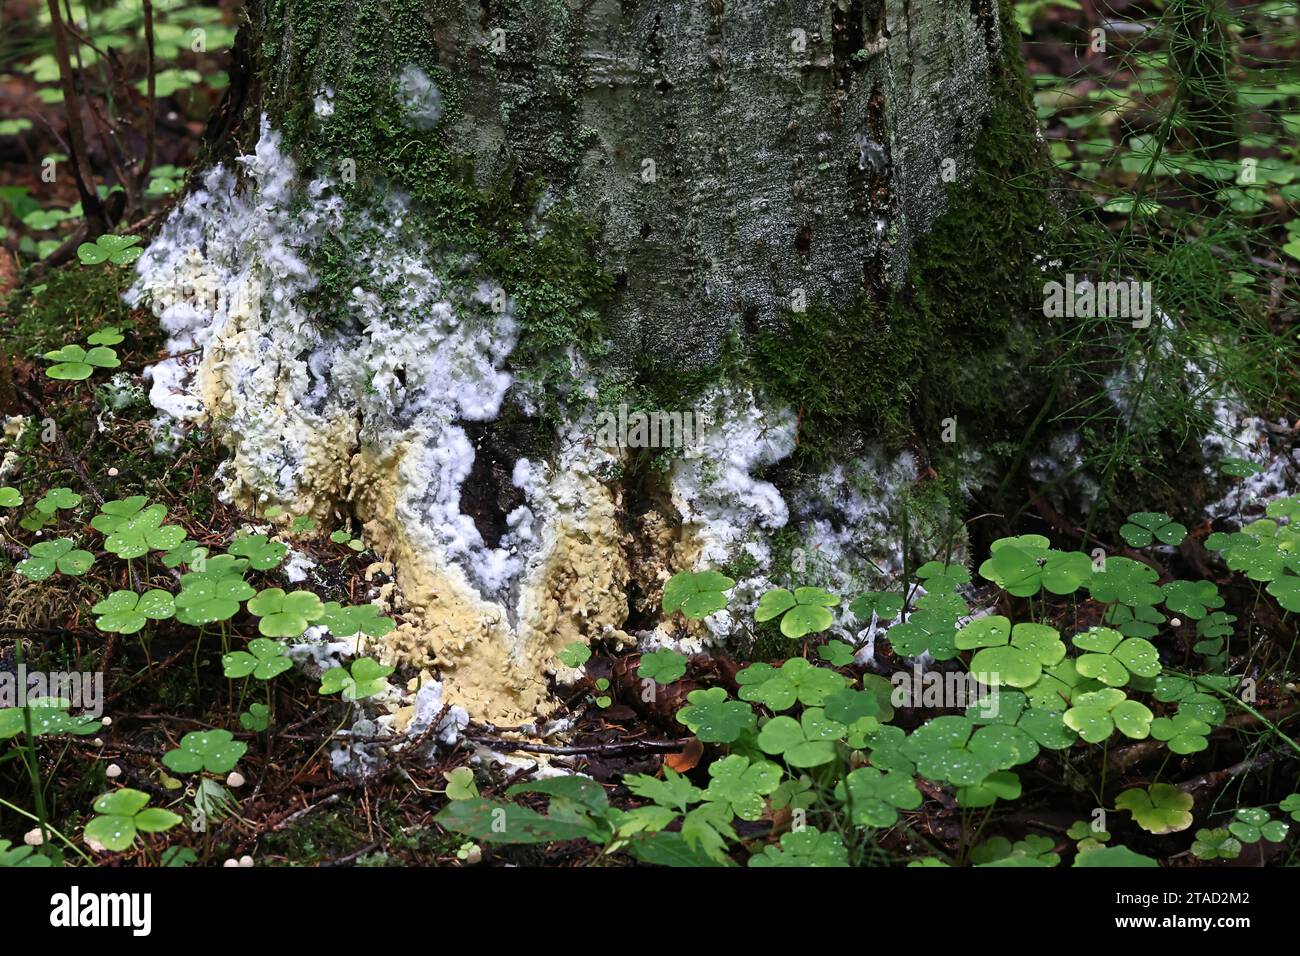 Vesiculomyces citrinus, also called Gloiothele citrina, a resupinate fungus growing on spruce stump in Finland Stock Photo